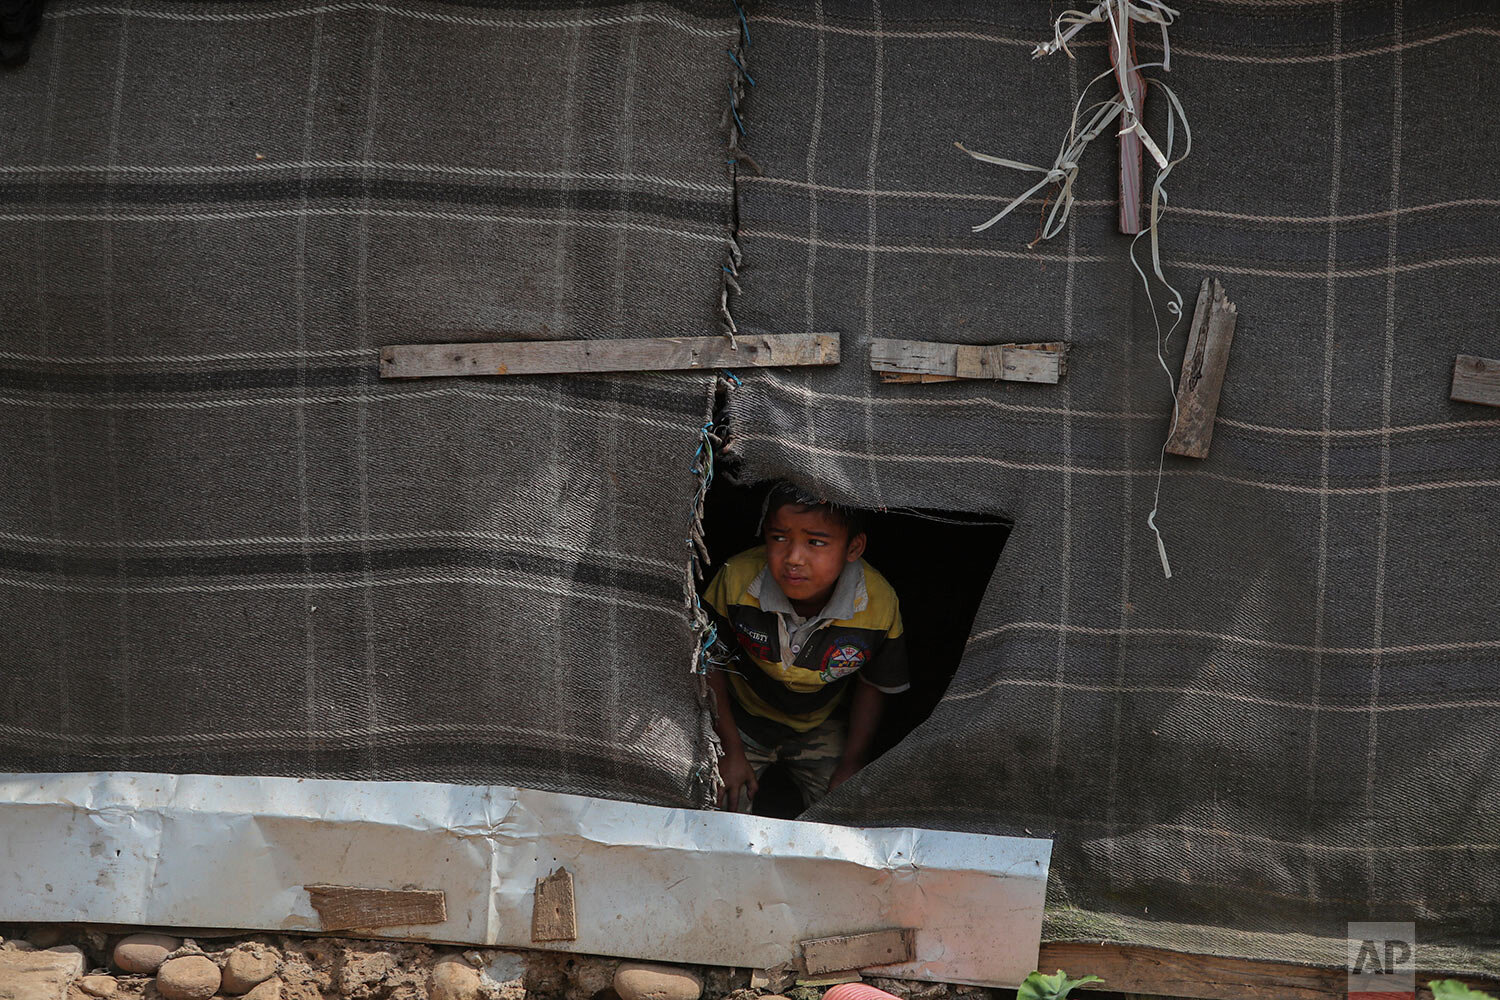  A Rohingya refugee boy looks through a torn blanket used as a partition at a makeshift camp on the outskirts of Jammu, India, Sunday, March 7, 2021. (AP Photo/Channi Anand) 